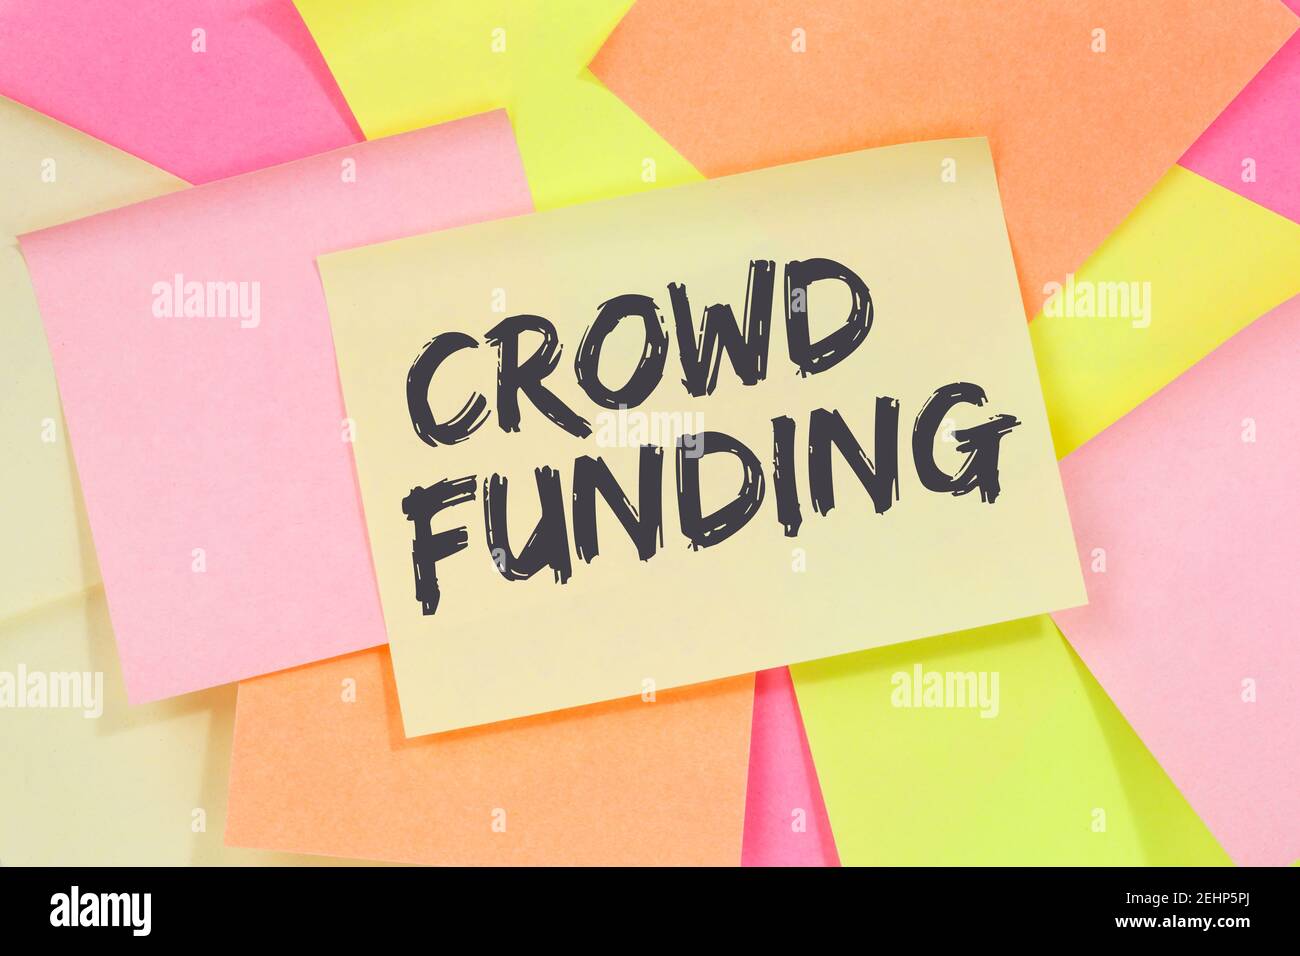 Crowd funding crowdfunding collecting money online investment internet business concept note paper notepaper Stock Photo